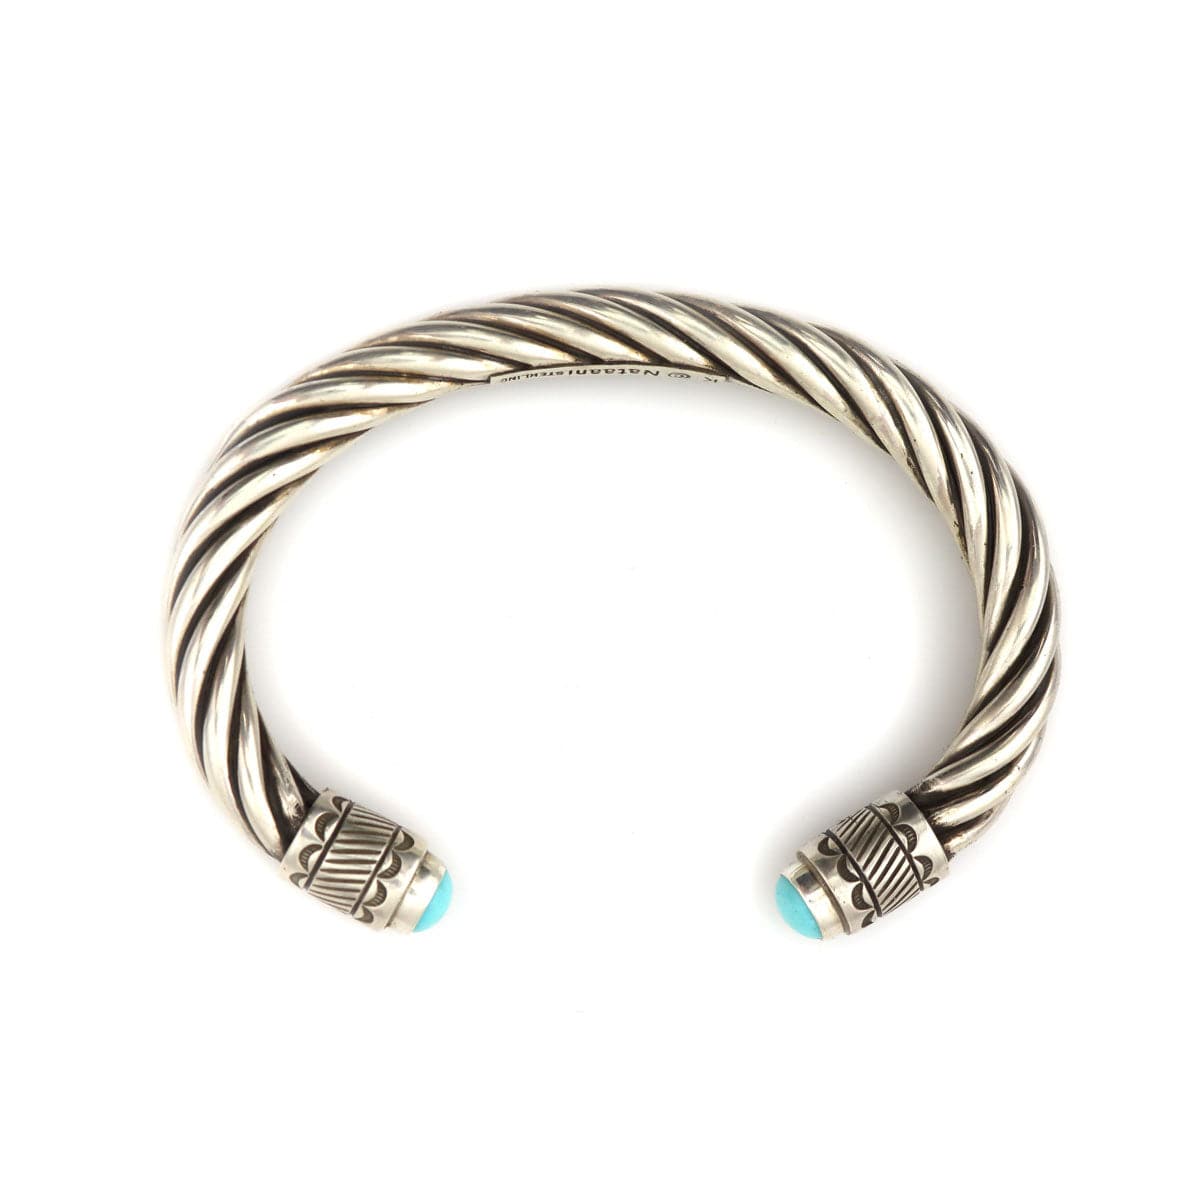 Kee (Karl) Nataani â€“ Navajo Sterling Silver Twisted Cable Design Bracelet with Turquoise on Terminals, Contemporary (J14184-002)4